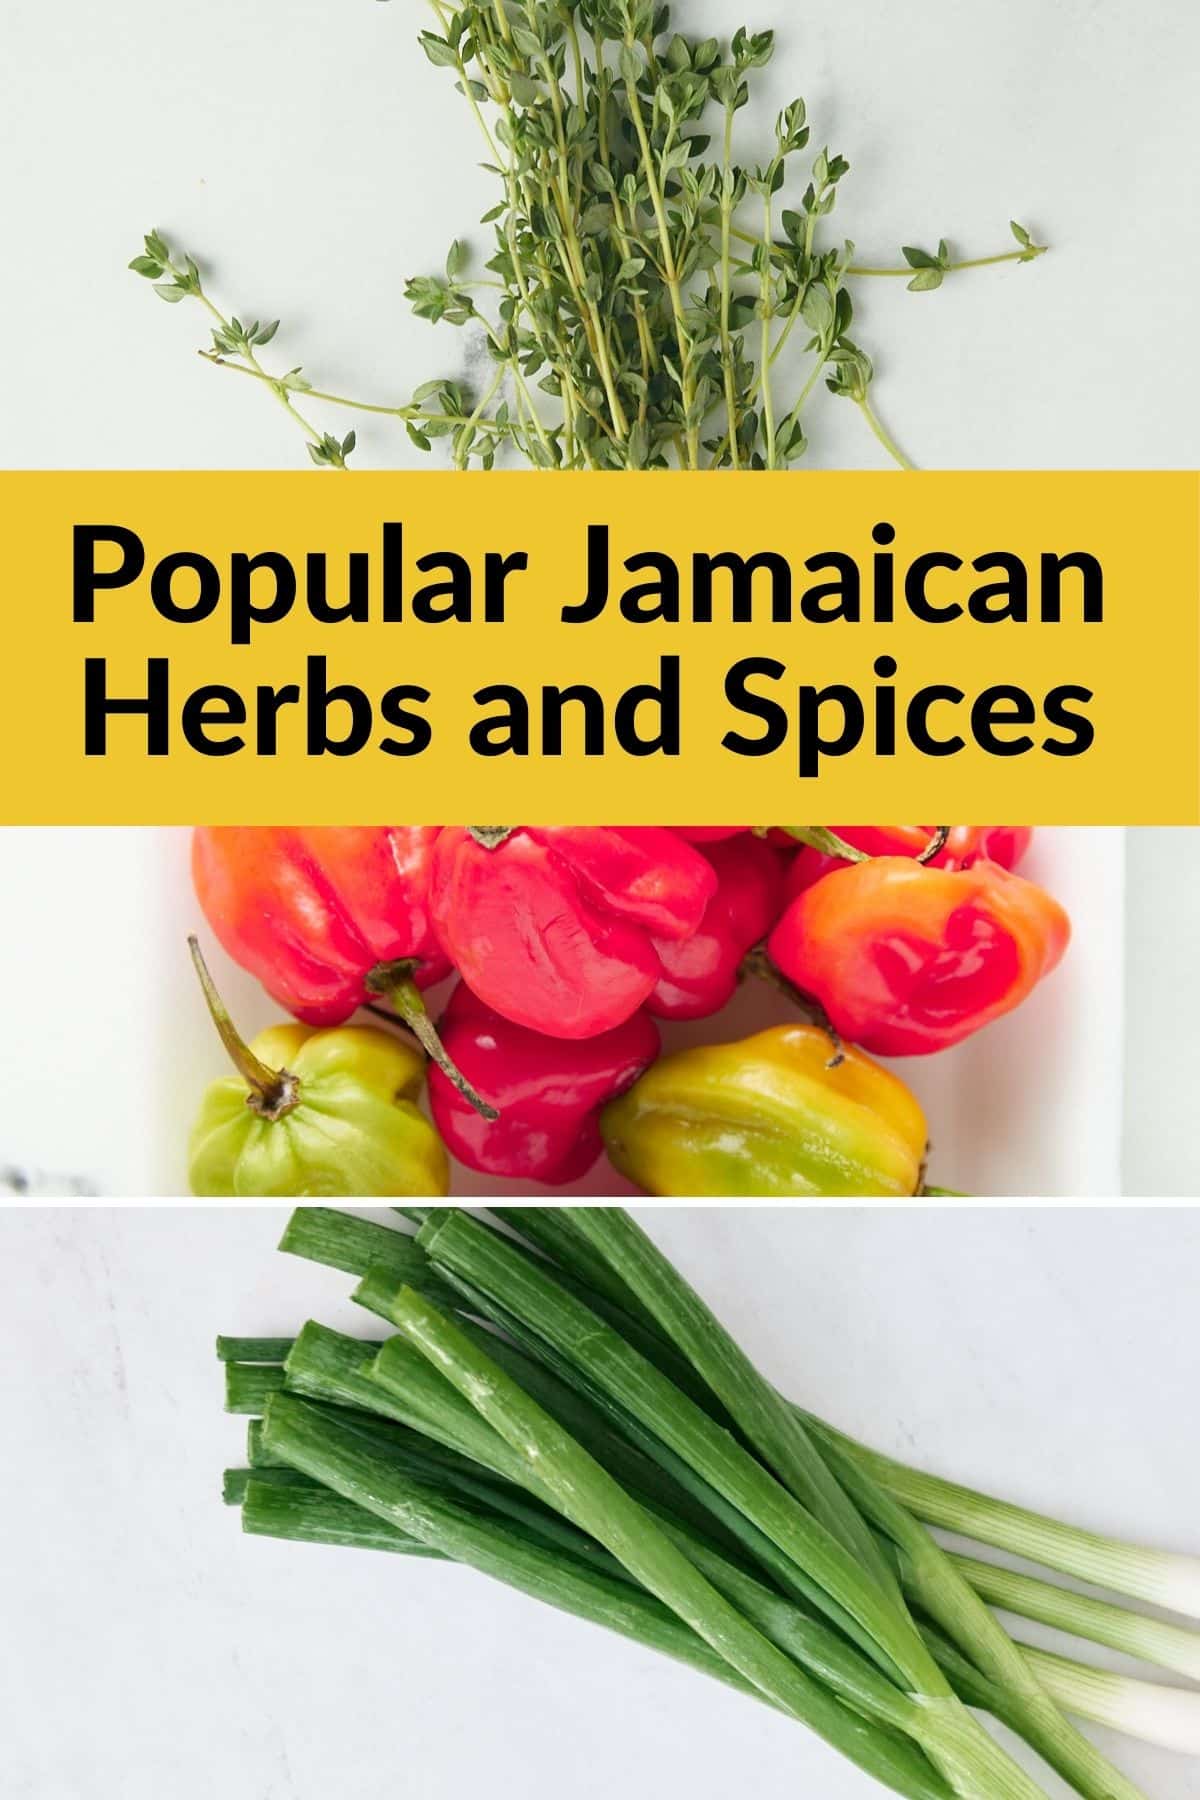 https://www.myforkinglife.com/wp-content/uploads/2022/06/Popular-Jamaican-Herbs-and-Spices-photo.jpg